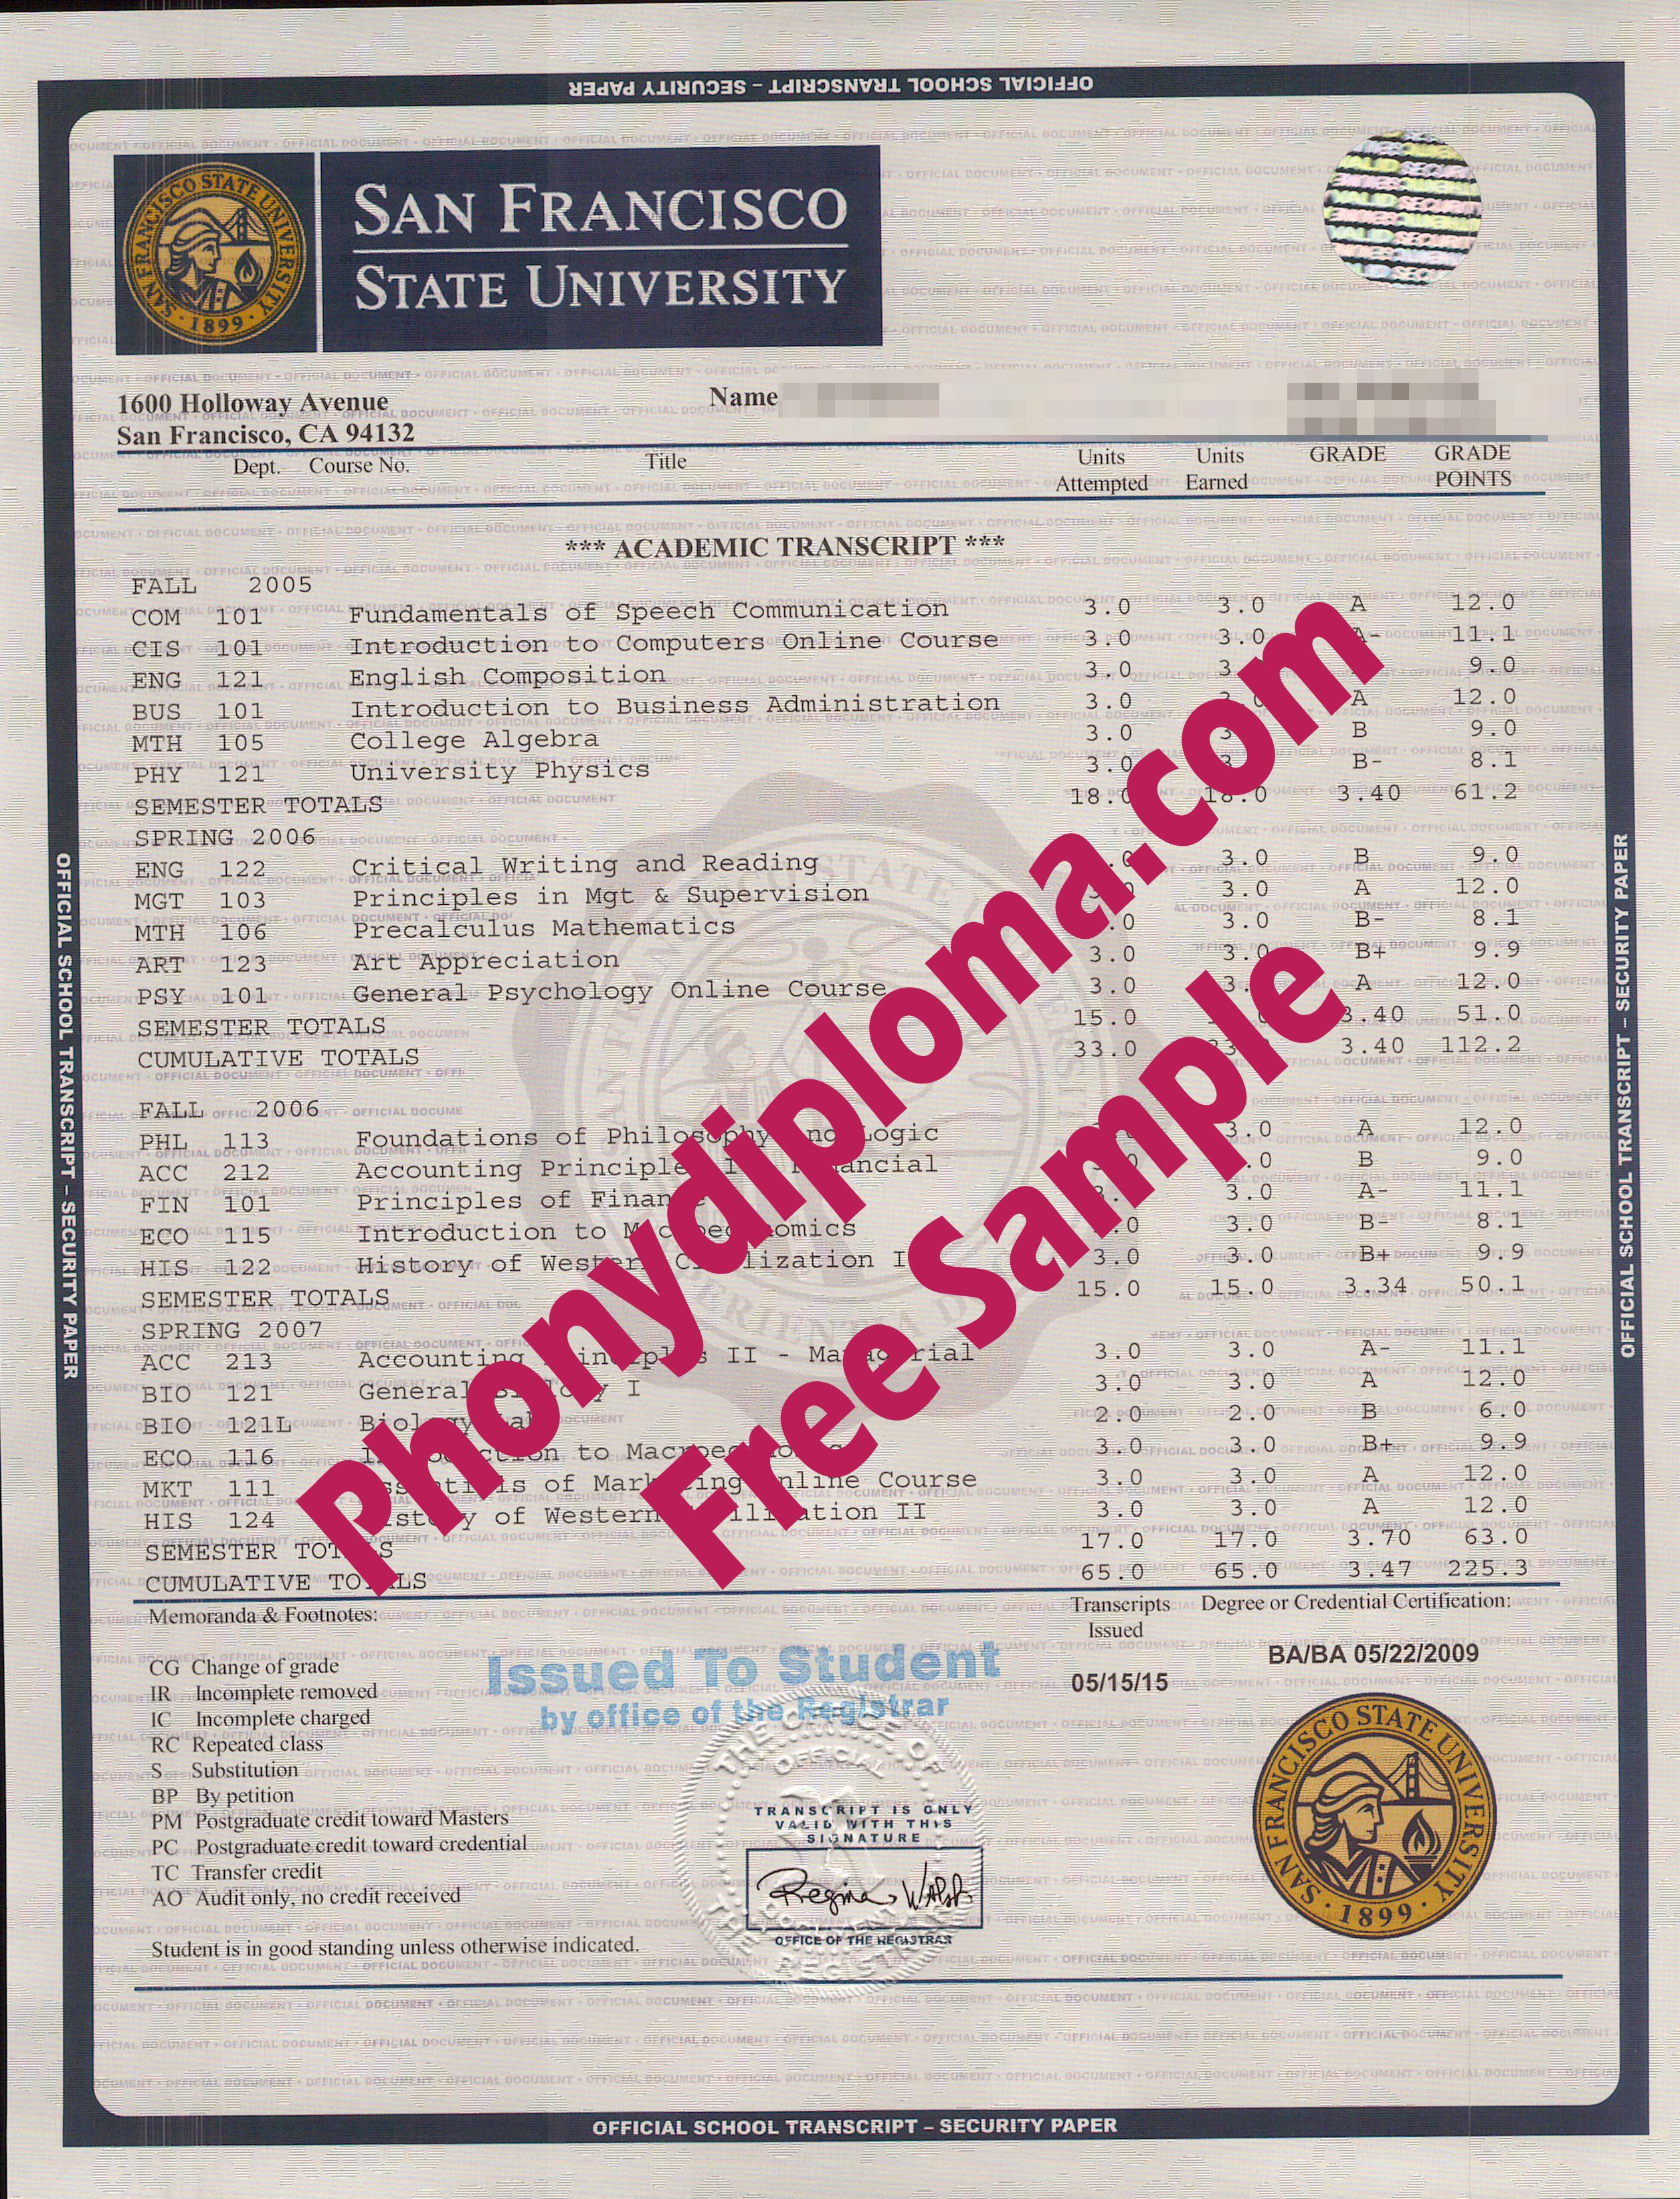 San Francisco State University House Design Transcript Free Sample From Phonydiploma